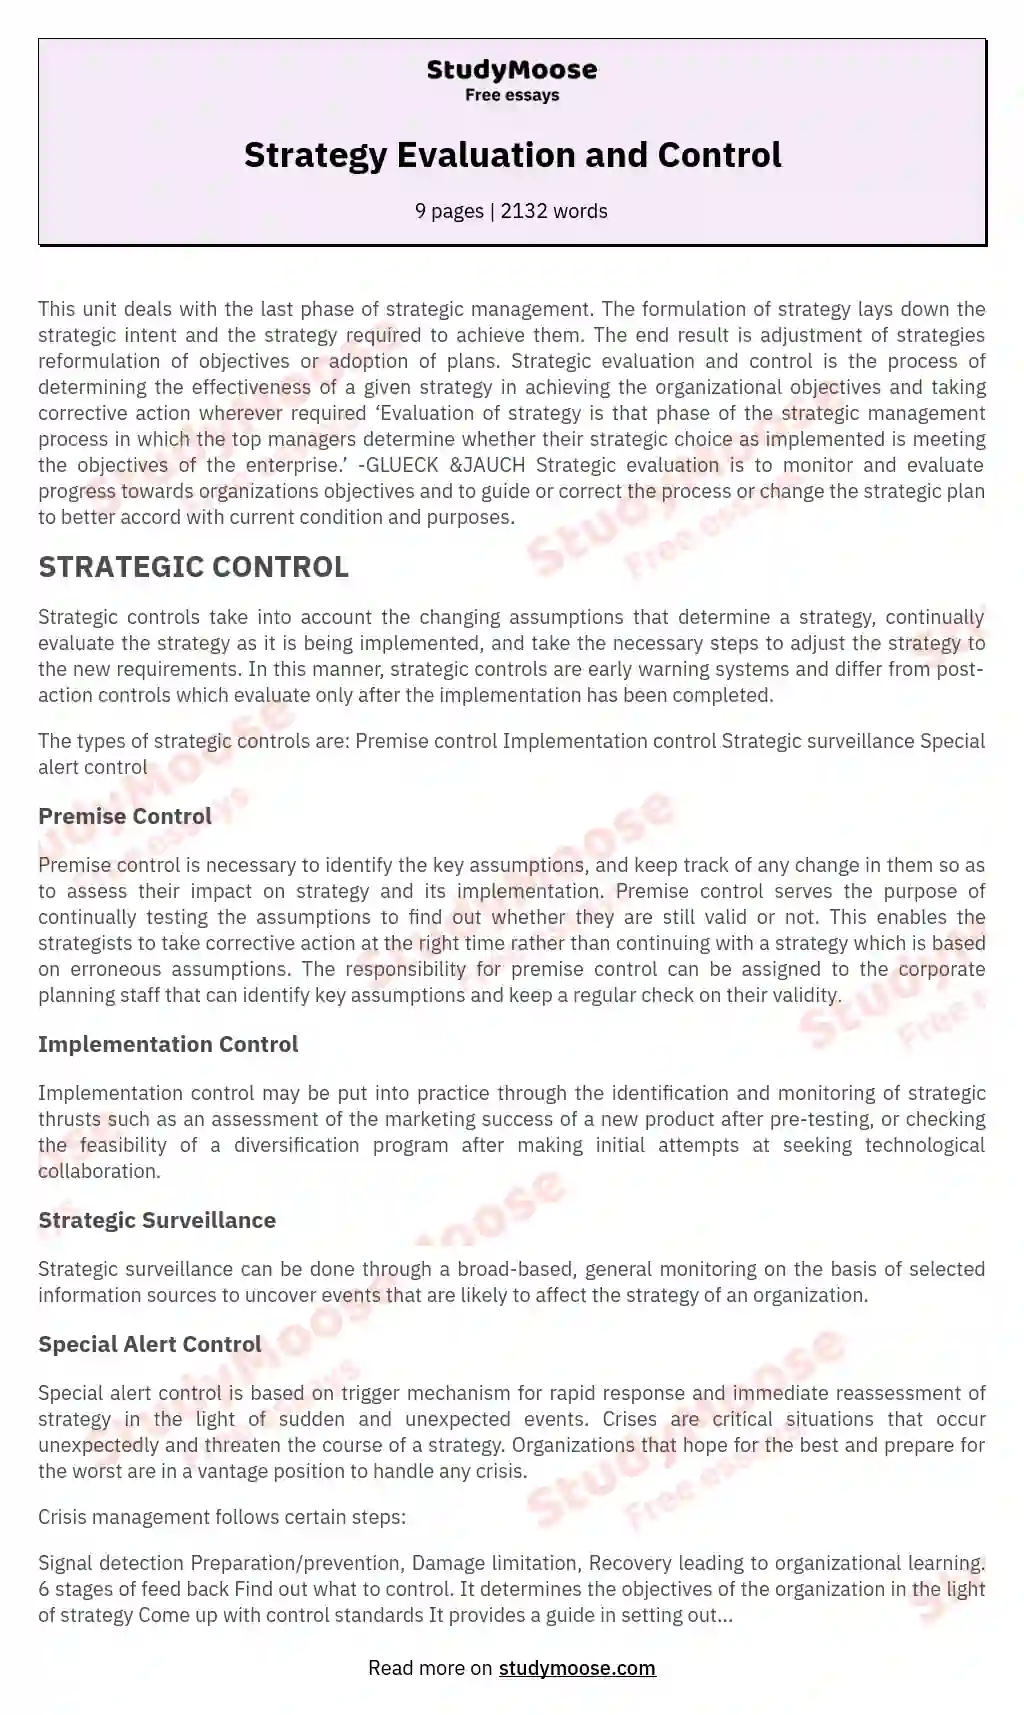 Strategy Evaluation and Control essay